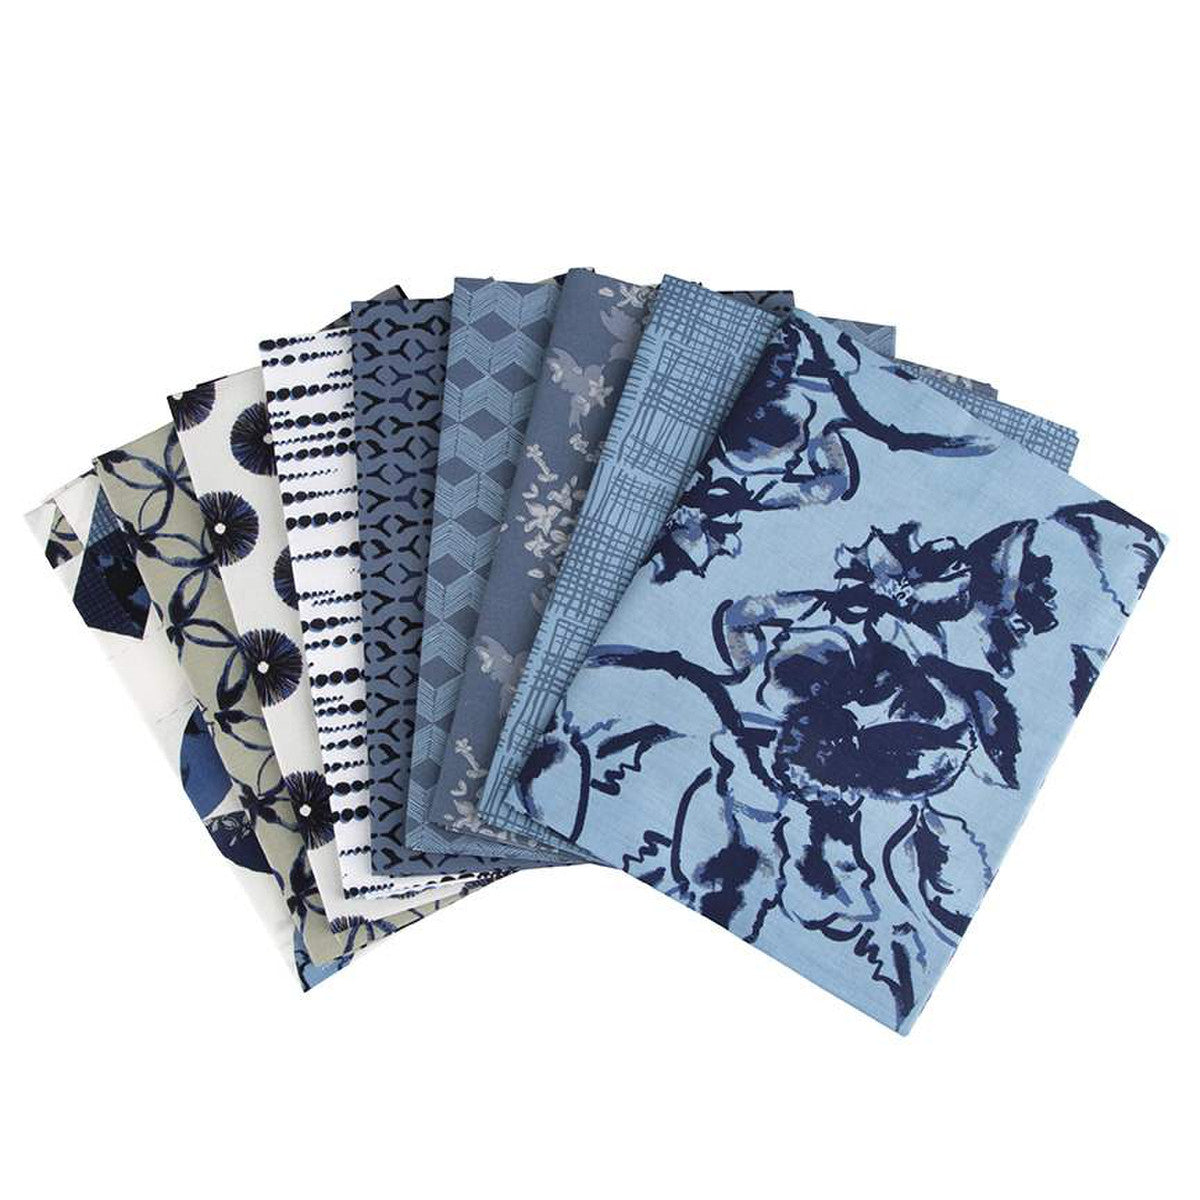 This 1-Yard precut bundle includes a 1-yard piece of each print in the blue colorway (C11320-LTBLUE, C11321-WARMGRAY, C11322-COASTAL, C11323-COASTAL, C11324-COASTAL, C11325-WHITE, C11326-COASTAL, C11327-WHITE, CH11328-CALM) from the Water Mark collection by Tammie Green for Riley Blake Designs for a total of 9 yards.  100% cotton  Width: 43"/44"